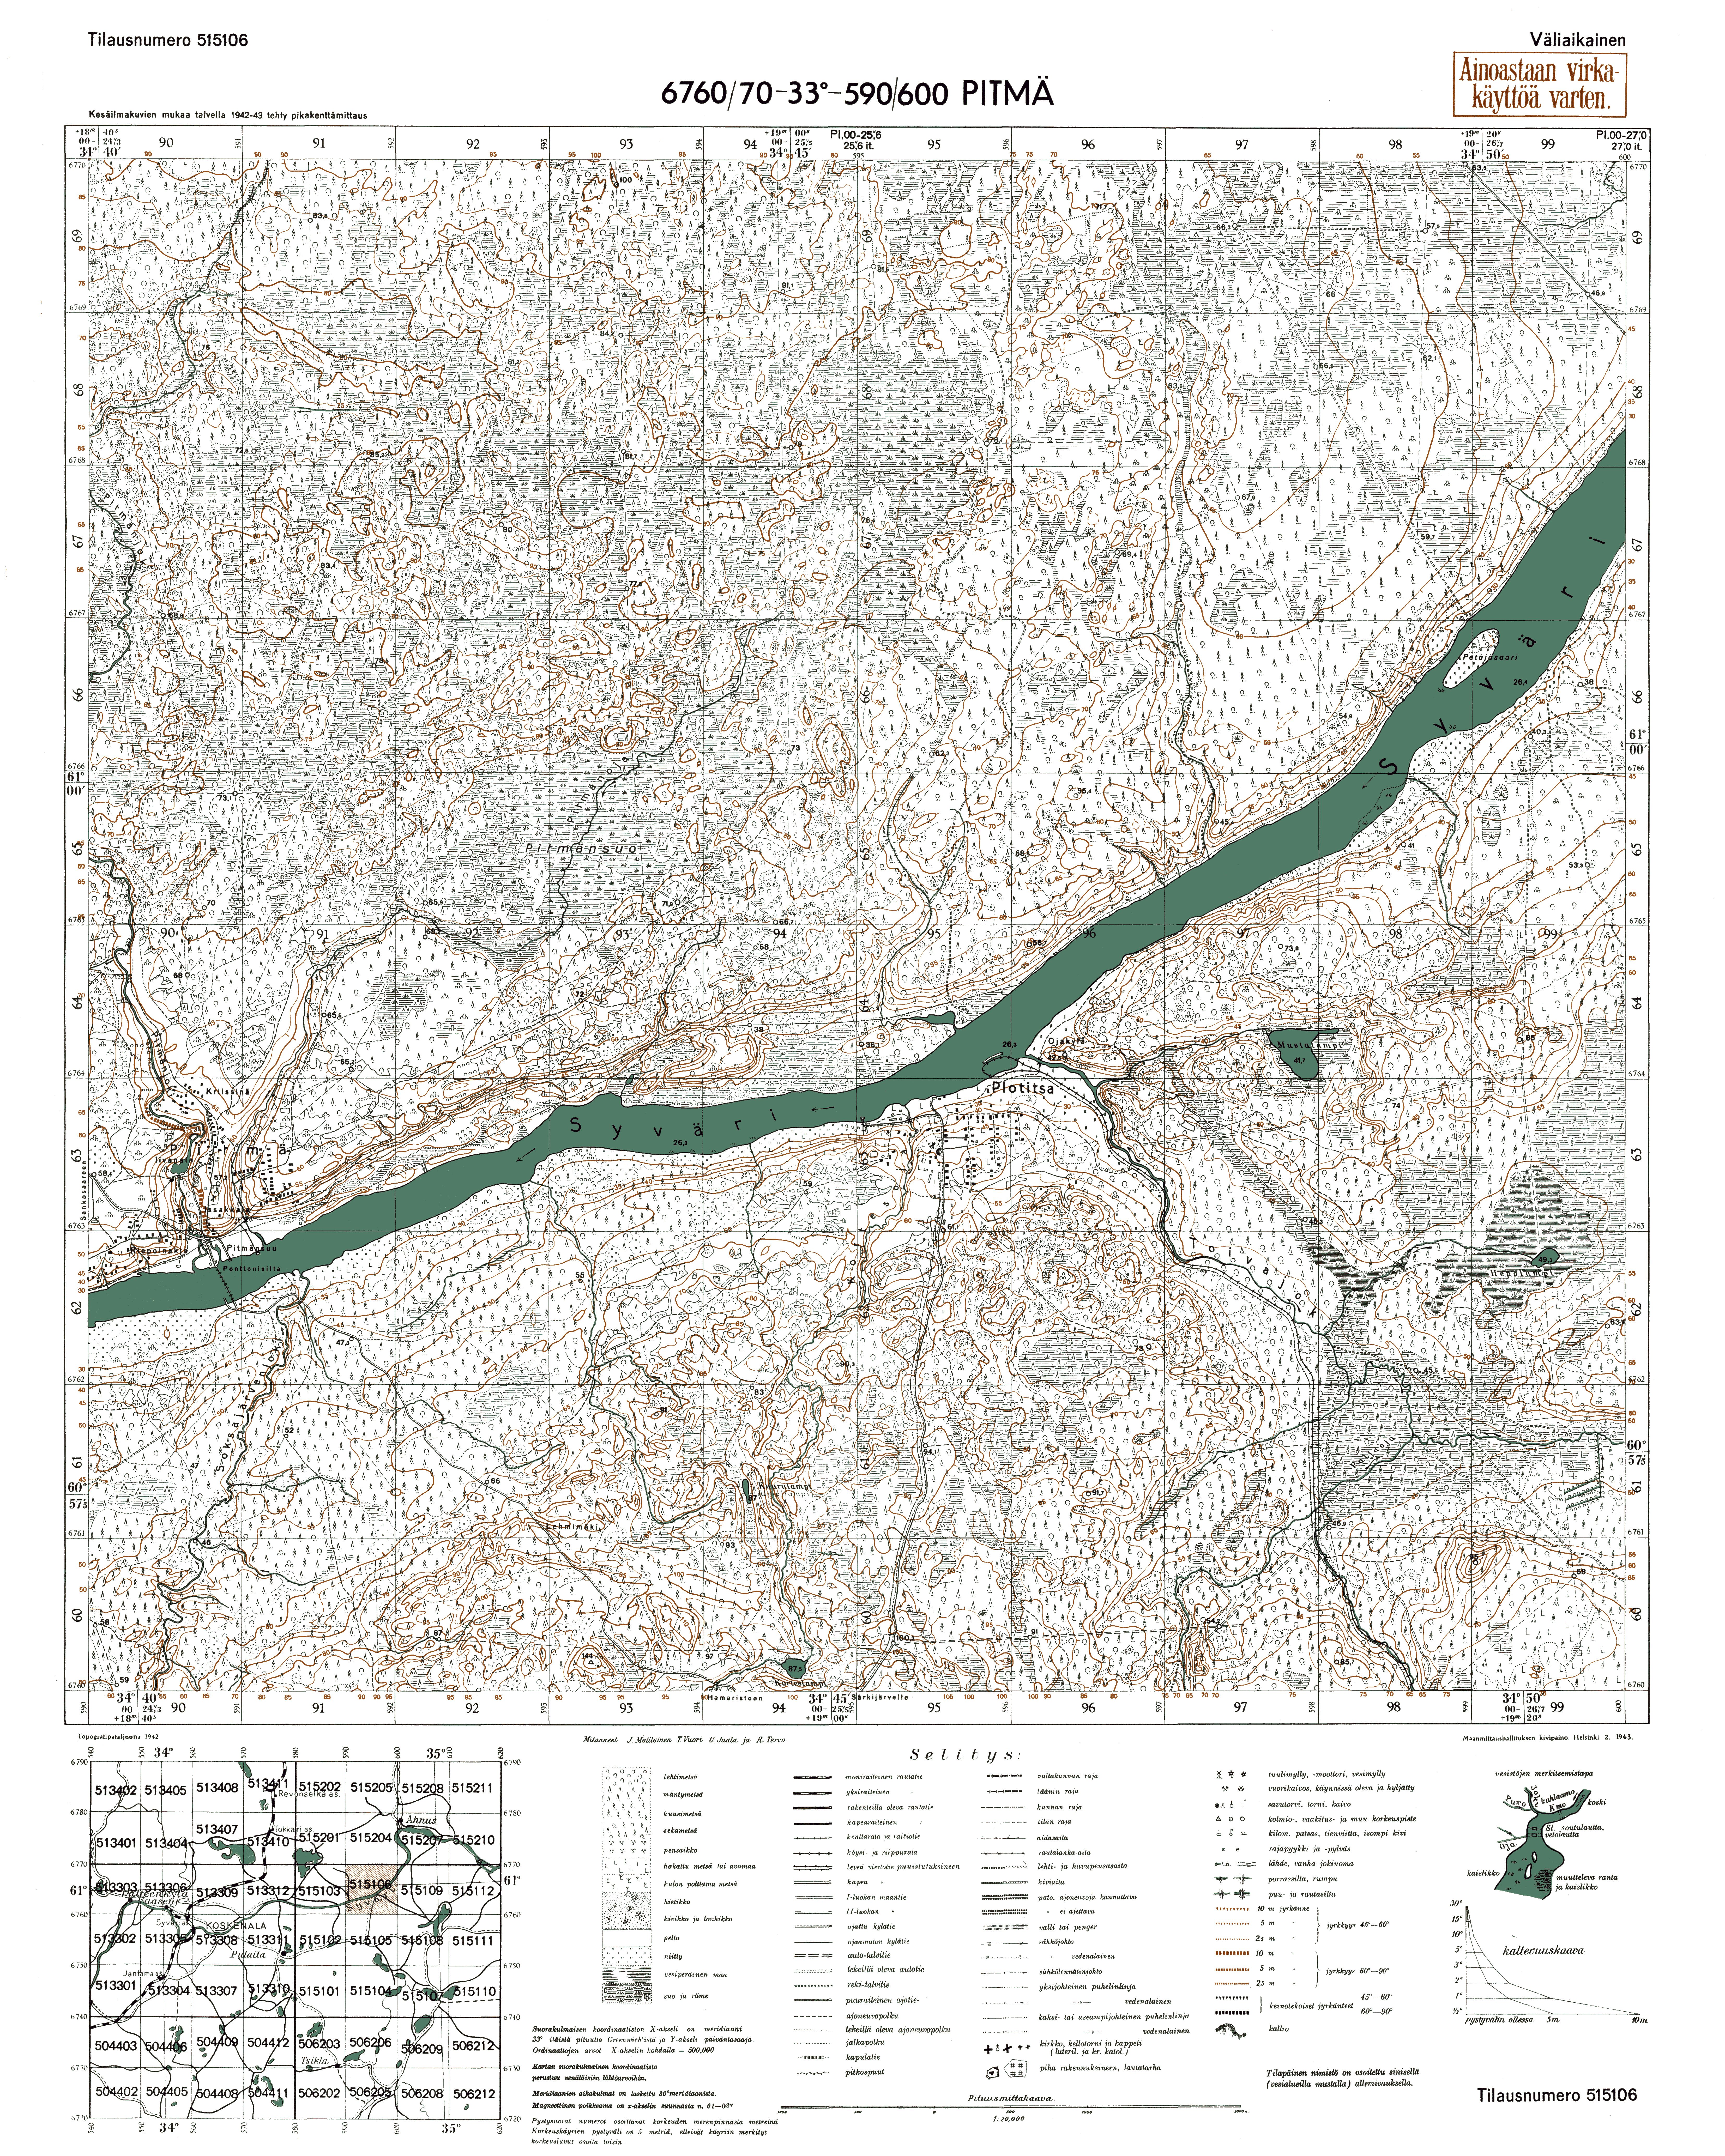 Pidma. Pitmä. Topografikartta 515106. Topographic map from 1943. Use the zooming tool to explore in higher level of detail. Obtain as a quality print or high resolution image